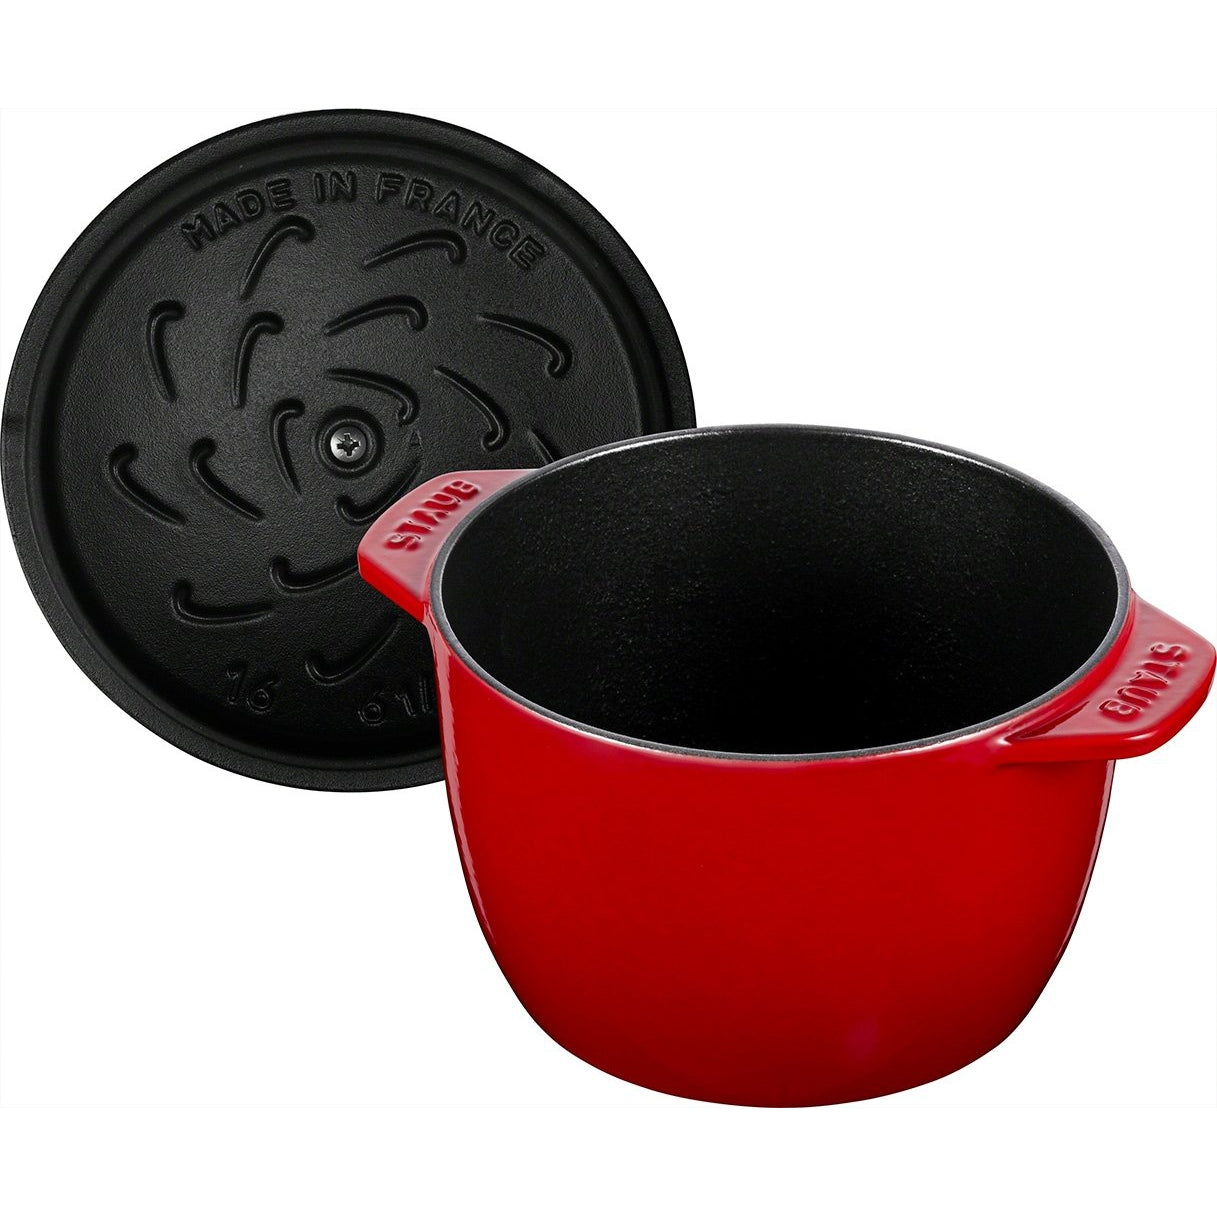 Staub French Oven / Rice Cocotte 16cm